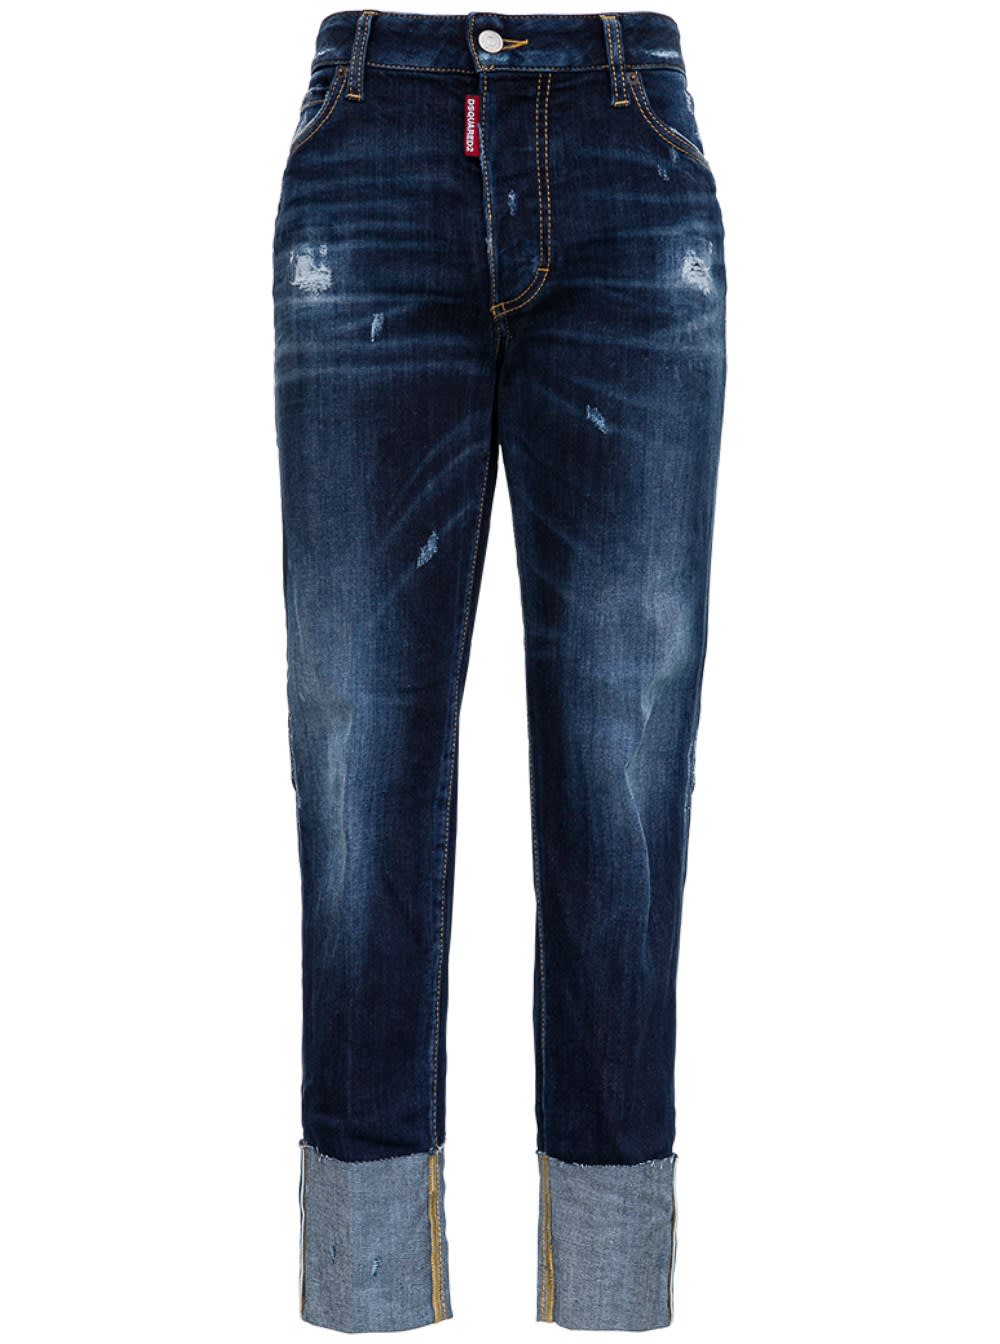 DSQUARED2 STRAIGHT JEANS WITH RIPPED DETAILS,S72LB0385S30708470